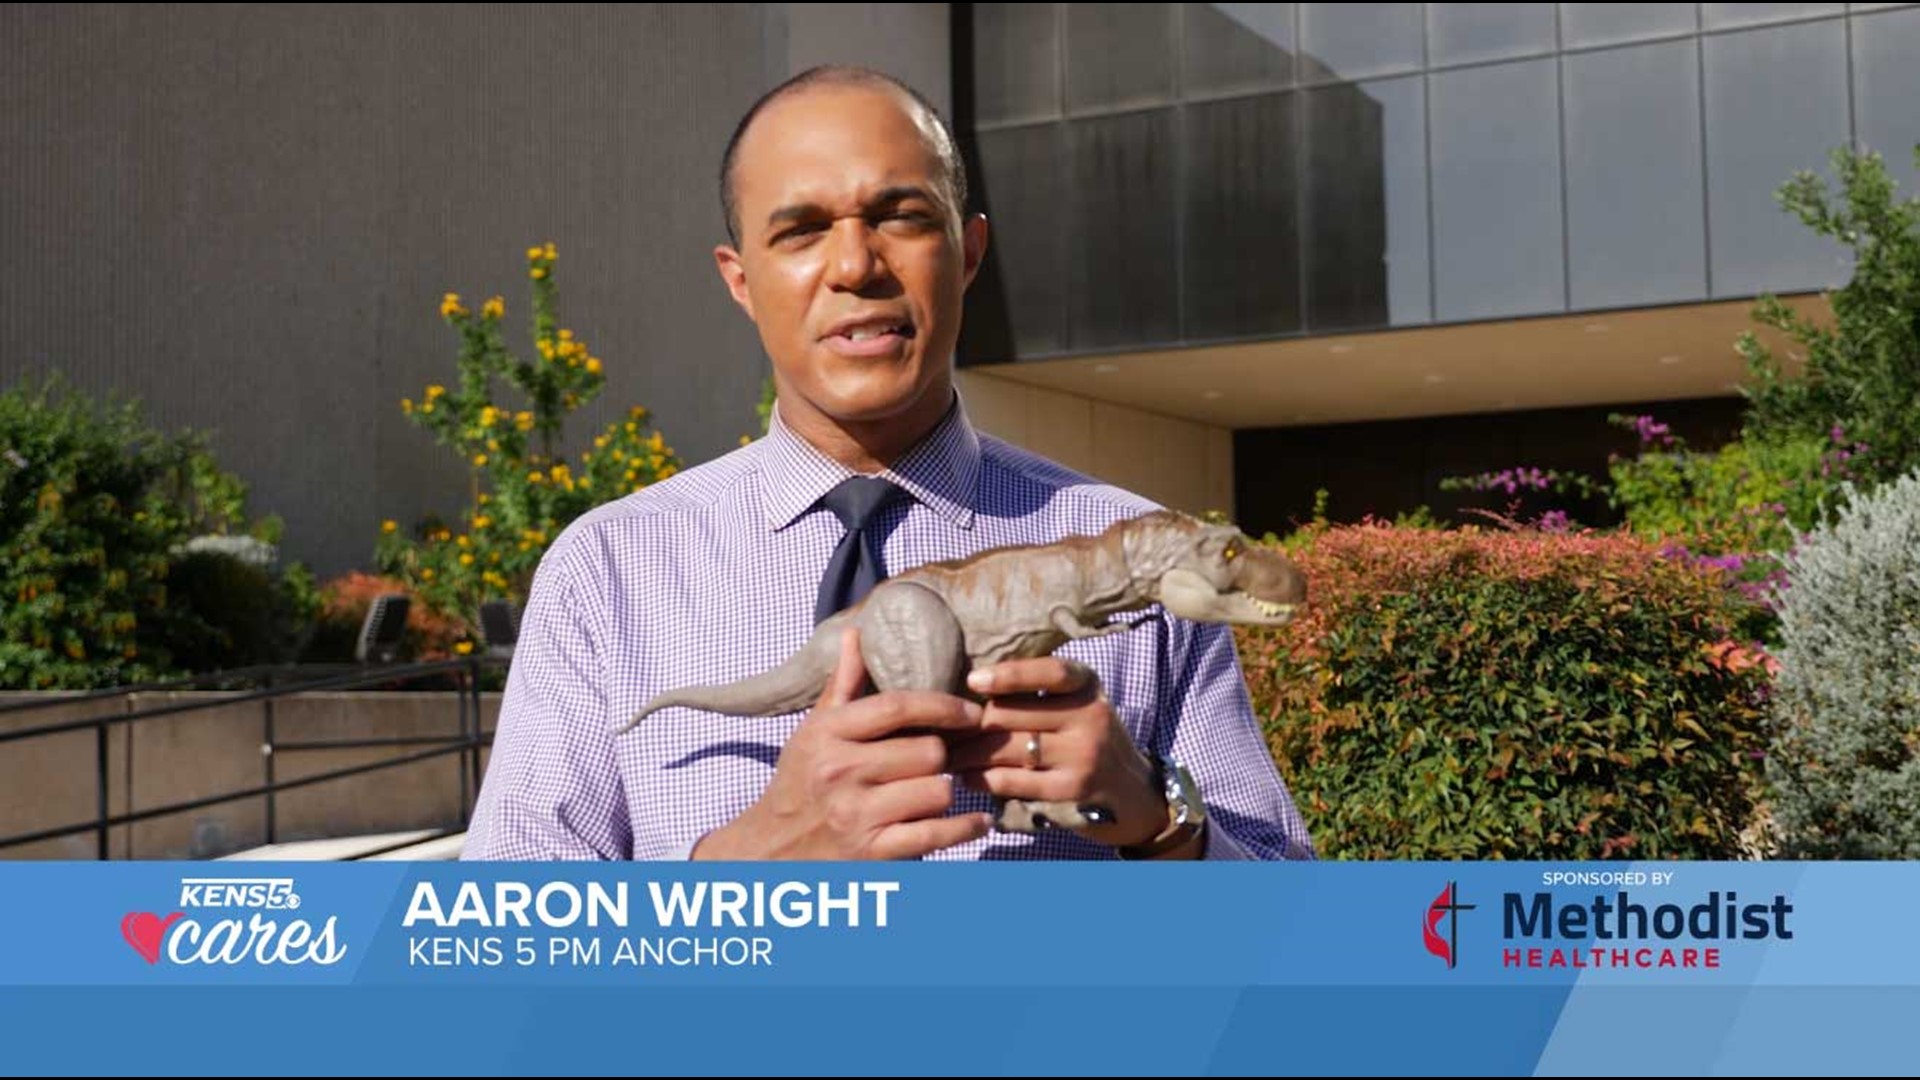 KENS 5's Aaron Wright says one of his favorite toys growing up was a T-Rex from Jurassic Park! You can create lasting memories for kids in need this holiday season.